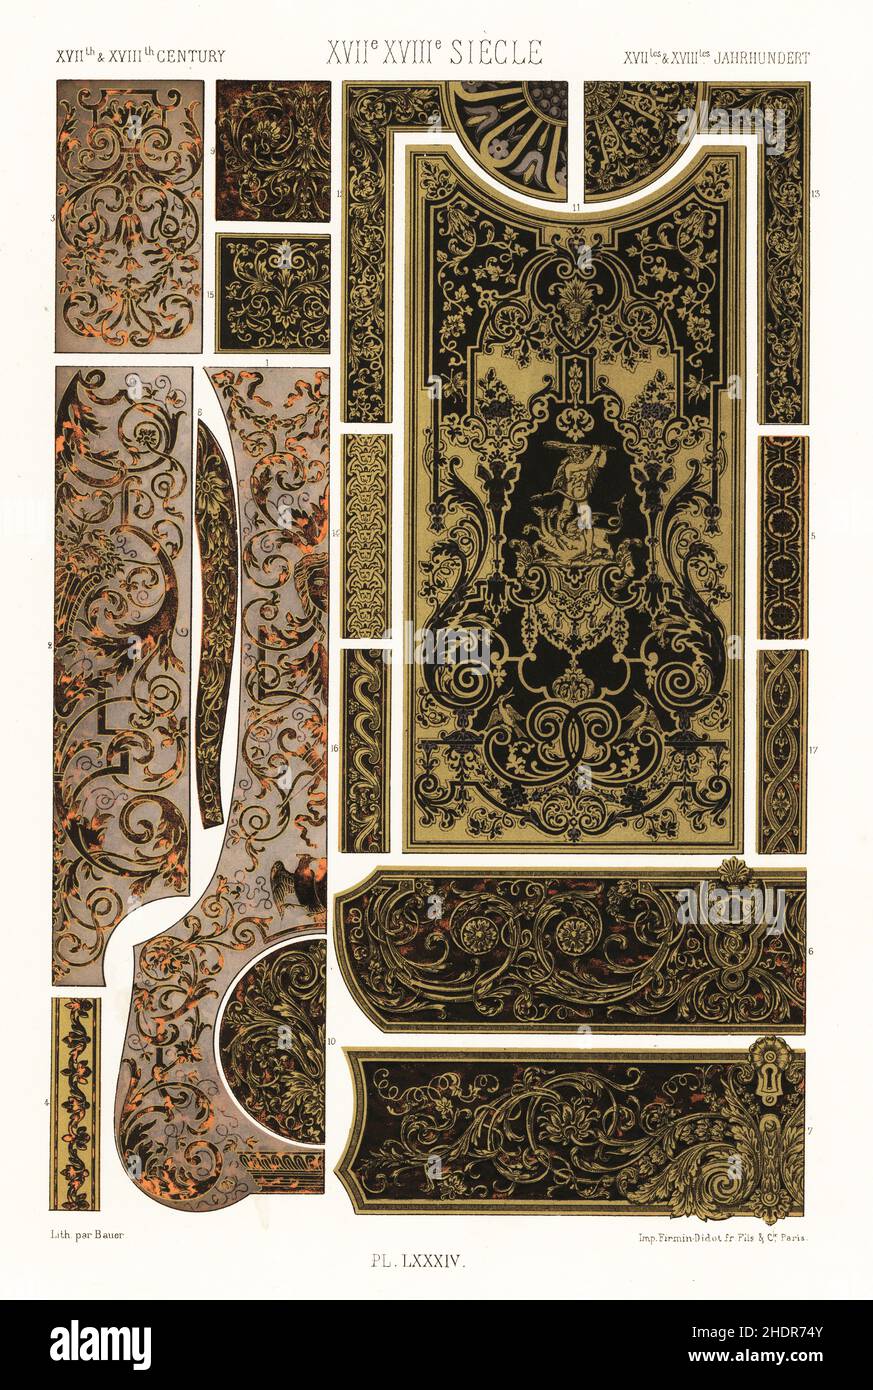 Inlaid work, Boulle, 17th and 18th centuries. Upright clock in copper with tortoiseshell ornaments 1-5, cabinets in marquetry 6-10, Louis XIV piece of furniture in ebony with copper ornaments showing Hercules and the Hydra 10-14, ornamentation in marquetry 15-17. XVIIme XVIIIme Siecle. Hand-finished chromolithograph by  Bauer from Albert-Charles-Auguste Racinet’s L’Ornement Polychrome, (Polychromatic Ornament), Firmin-Didot, Paris, 1869-73. Stock Photo